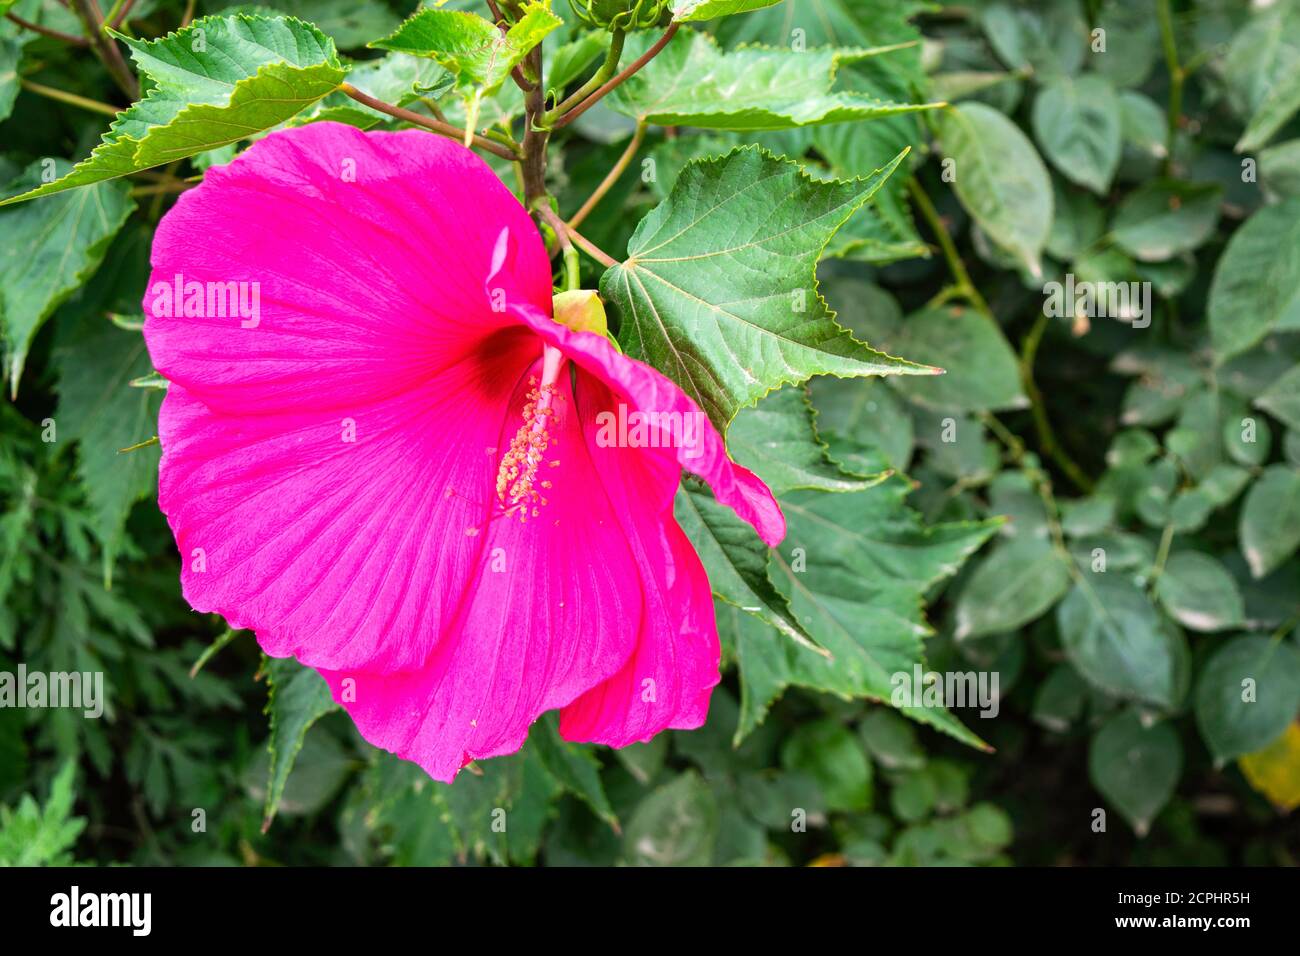 a pink hibiscus flower blooming against green foliage Stock Photo